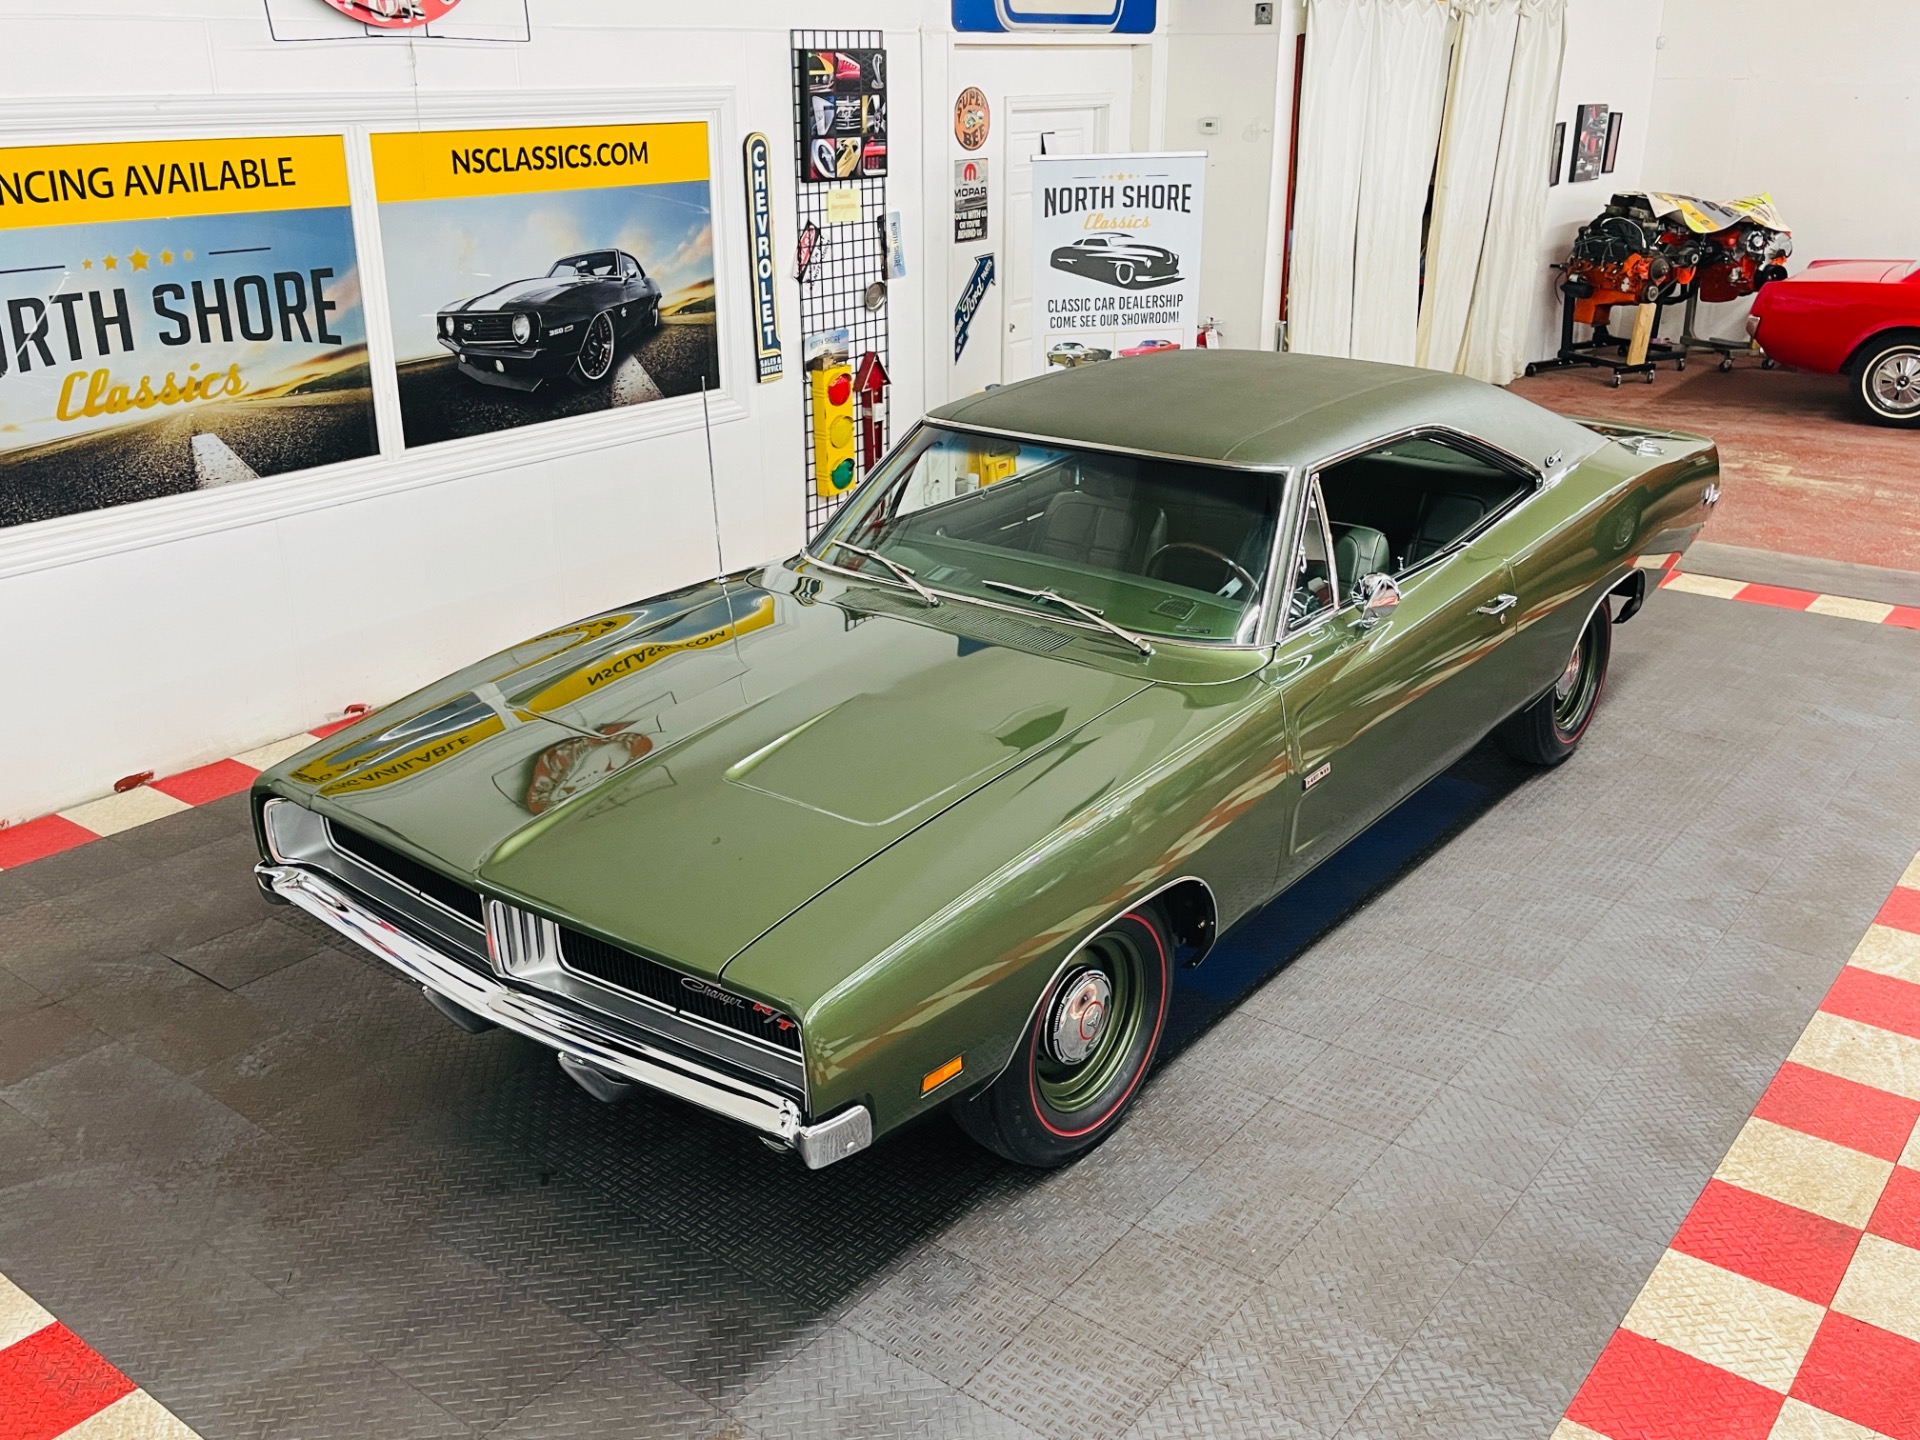 Used 1969 Dodge Charger - R/T - 426 HEMI - 4 SPEED MANUAL - CONCOURSE  QUALITY - SEE VIDEO - For Sale (Sold)